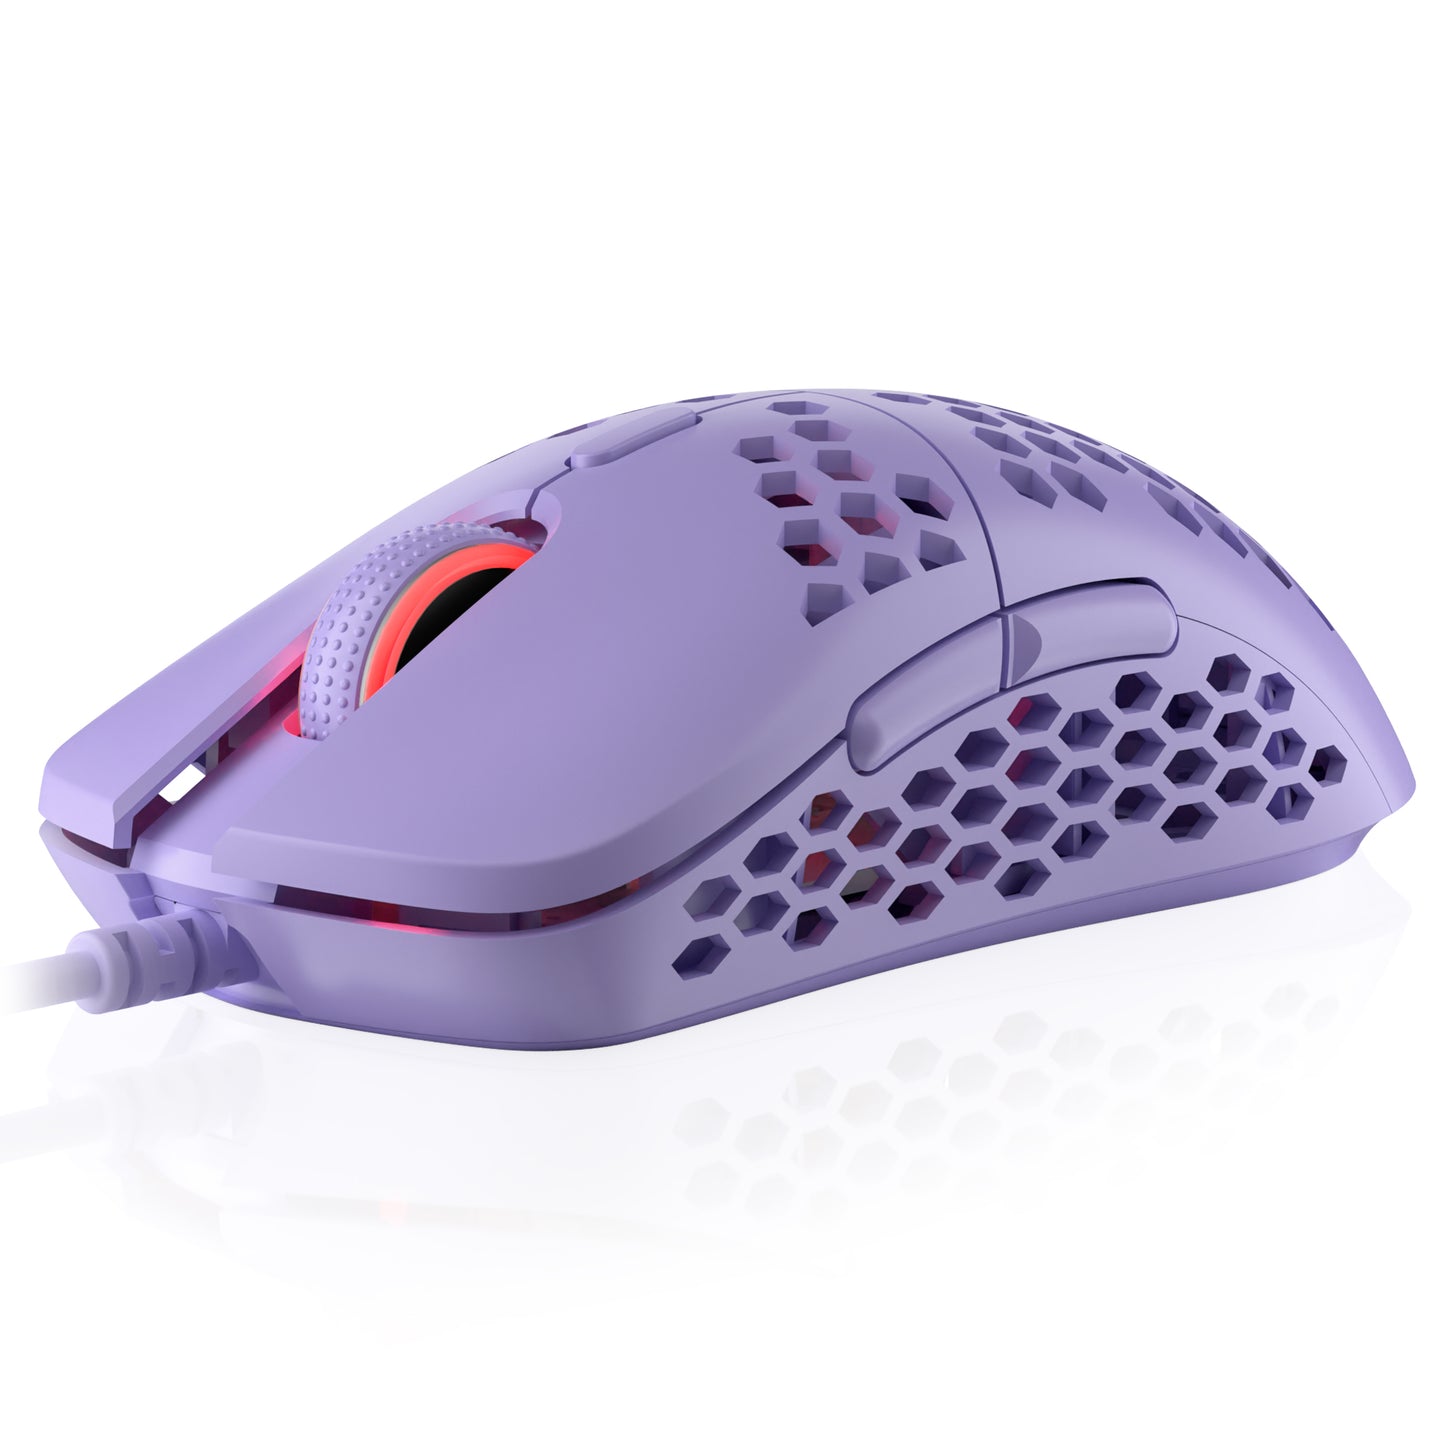 Mira-M Gaming Mouse - Up to 12,000 dpi - 63g